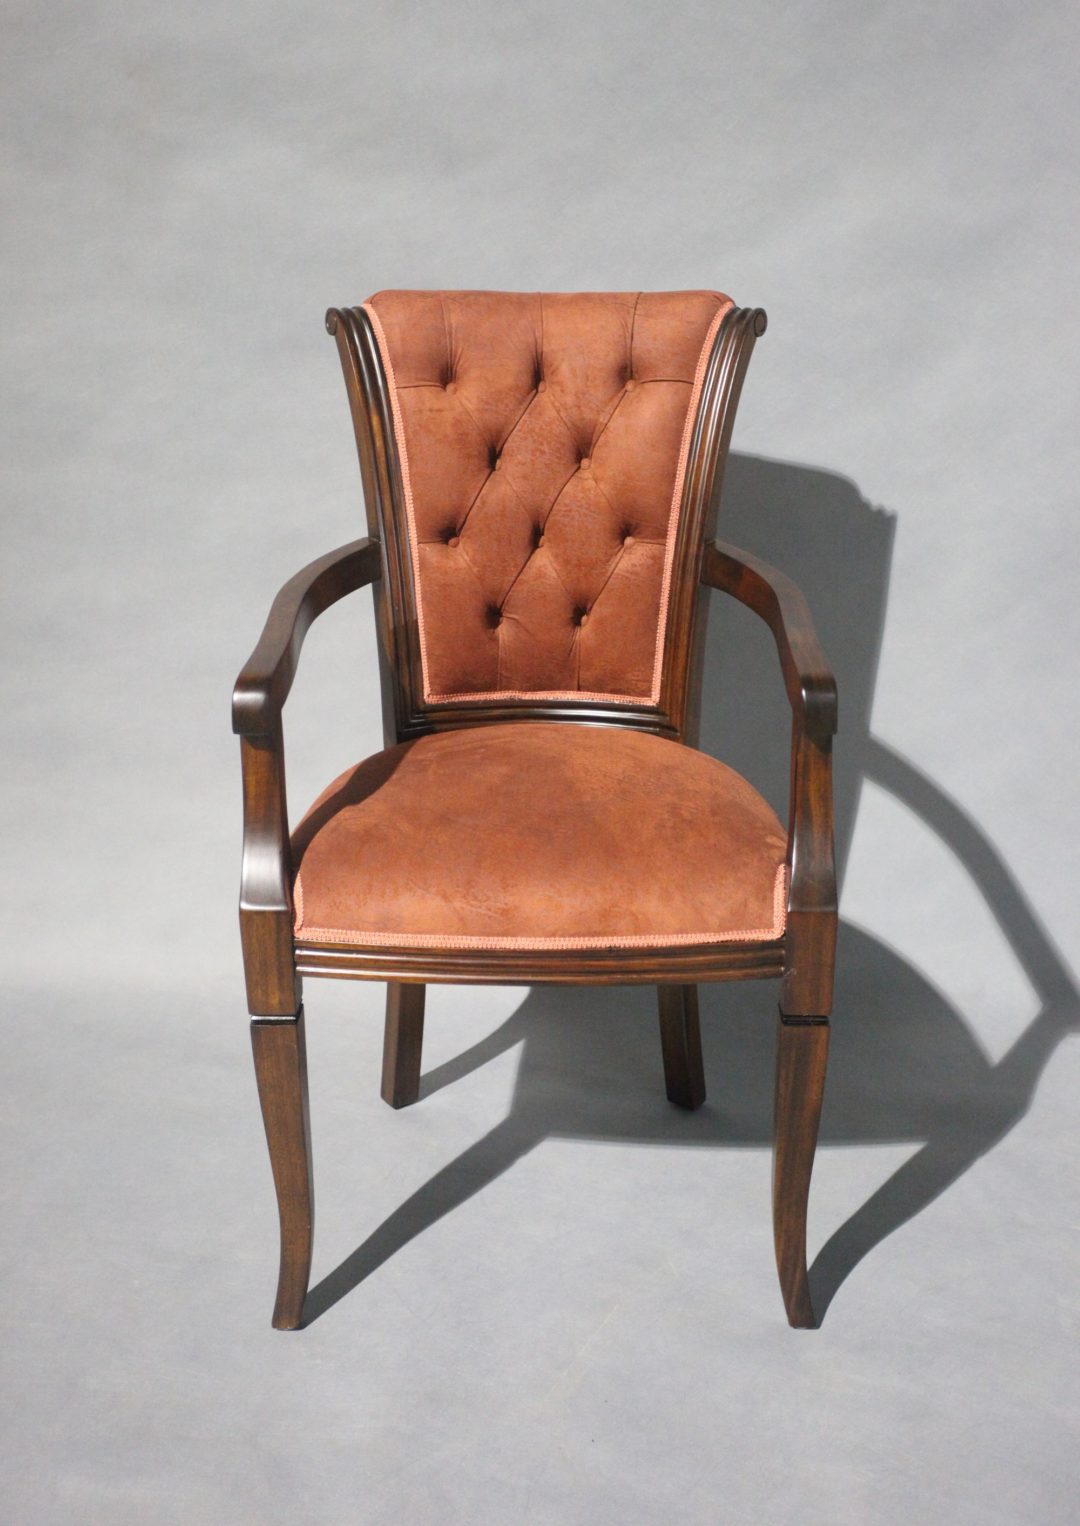 Solid Mahogany Wood Large Optima Arm Chair Antique